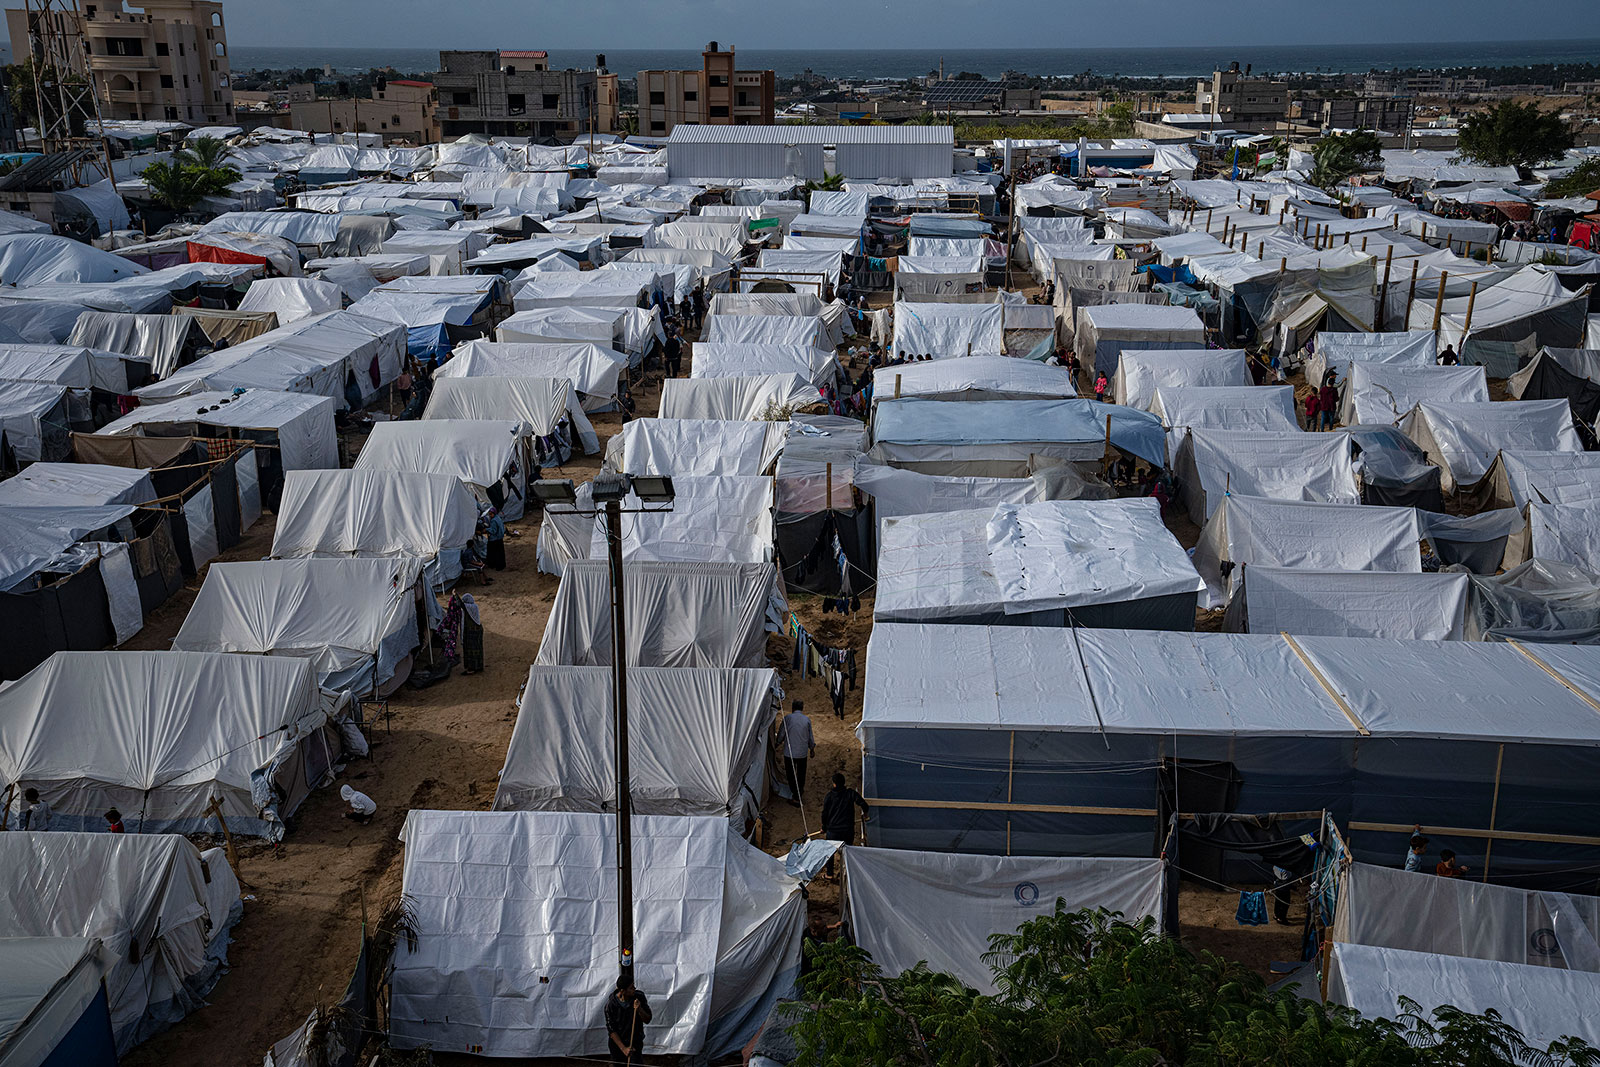 A UN tent camp for displaced Palestinians in Khan Younis, as seen on November 19